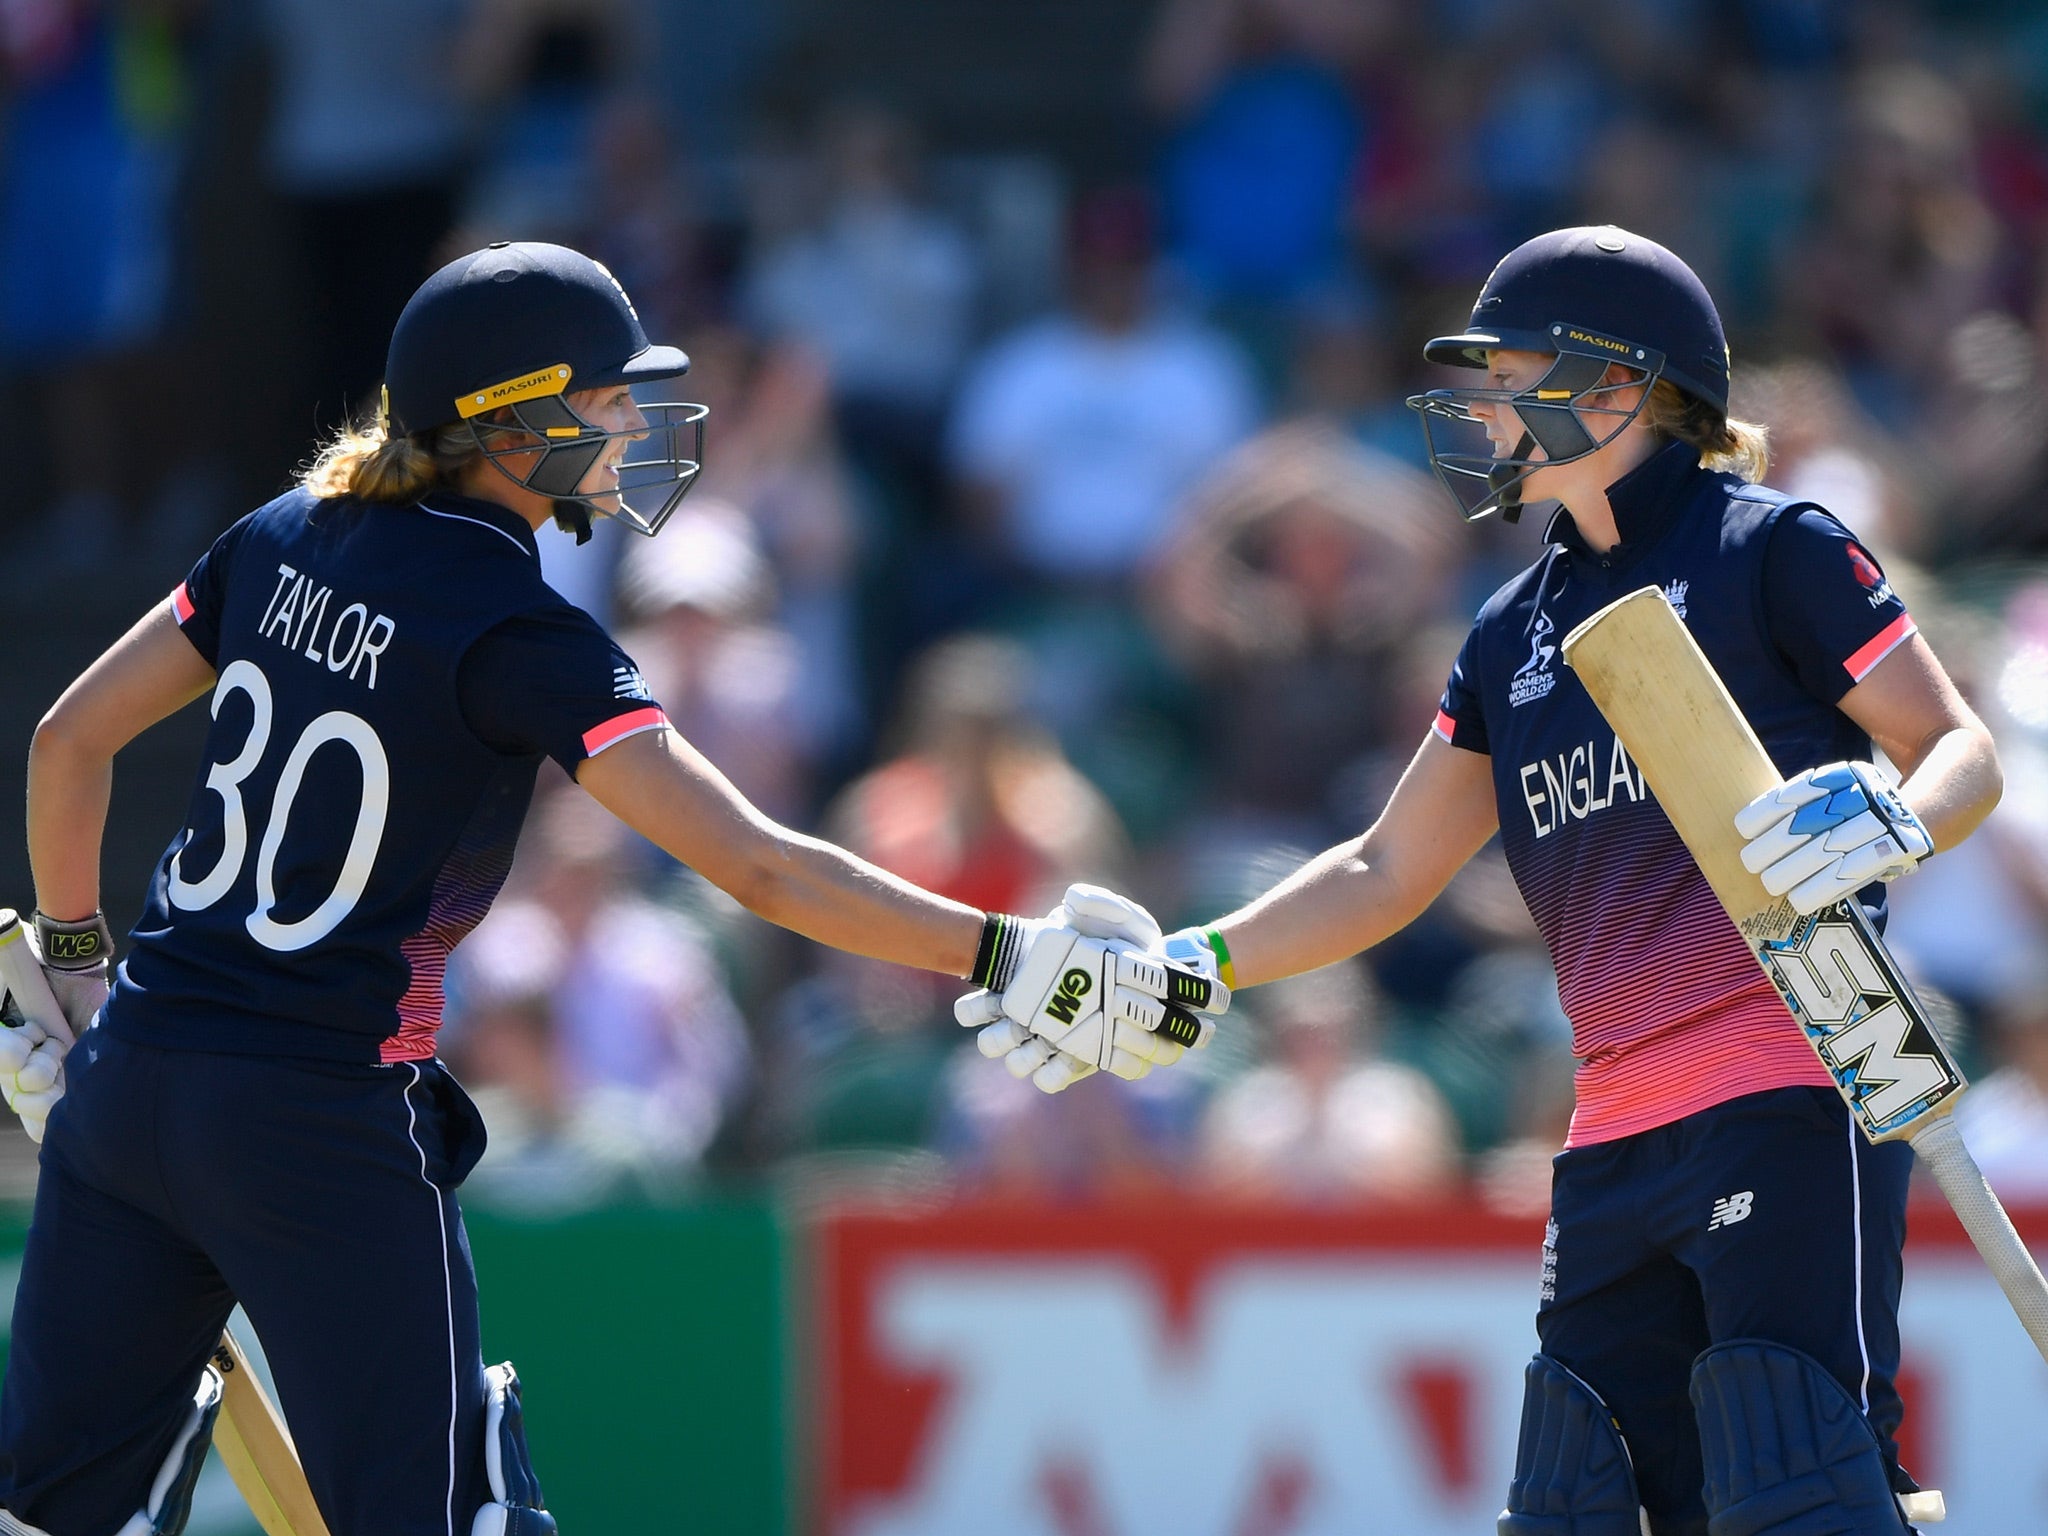 Heather Knight and Sarah Taylor were instrumental in England's comfortable victory